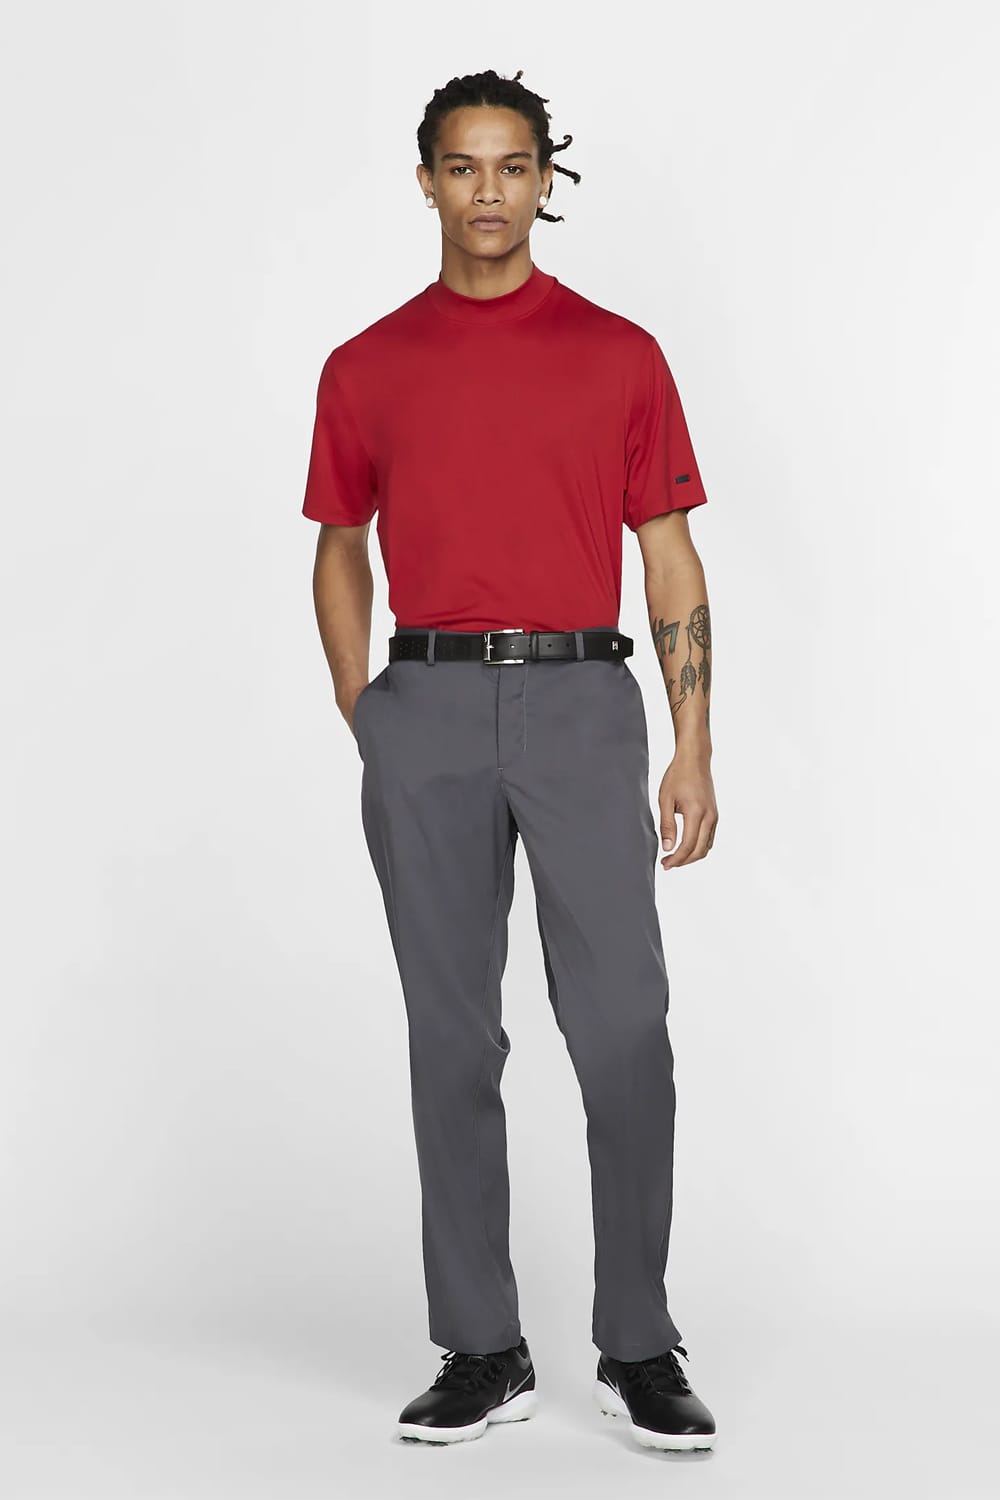 tiger woods clothing brand